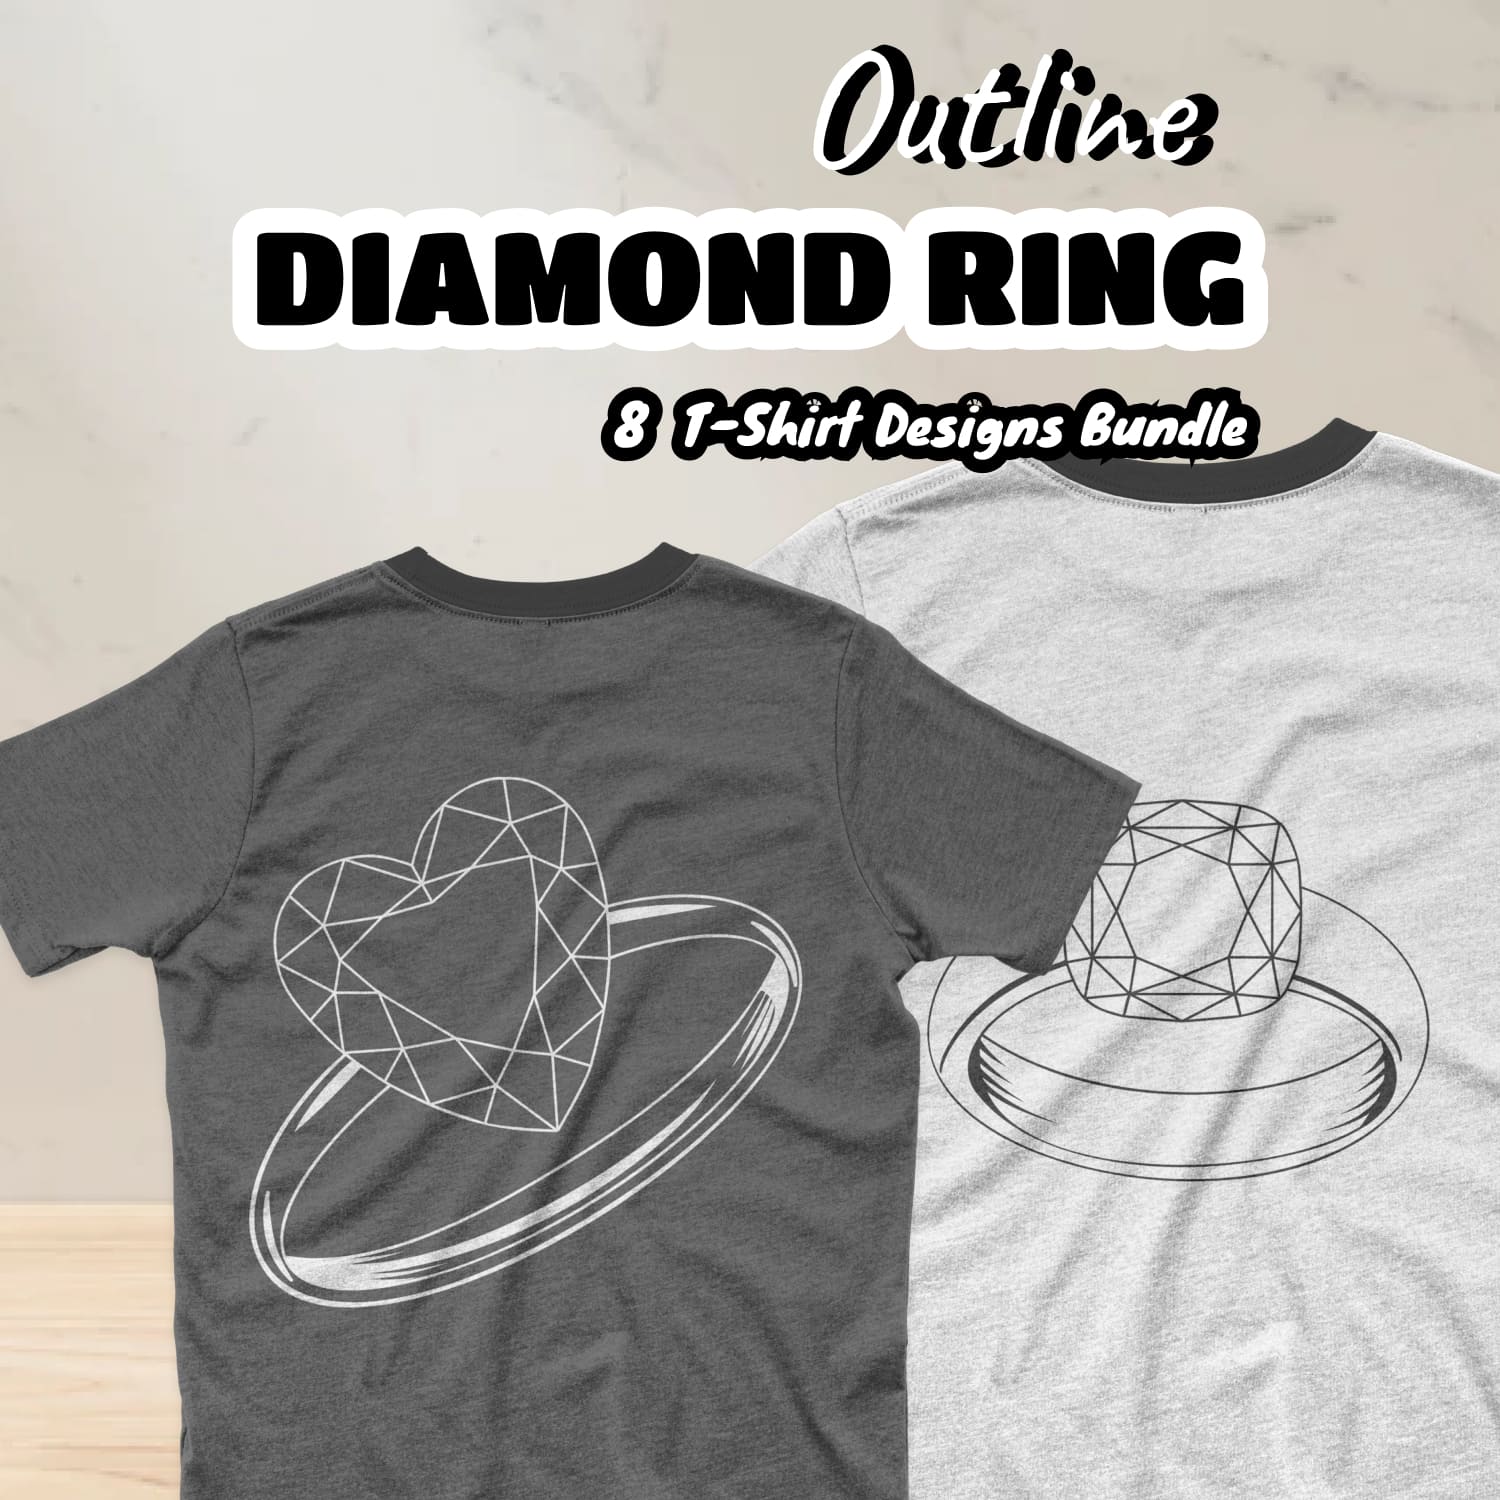 Collection of T-shirt images with charming outline diamond ring prints.